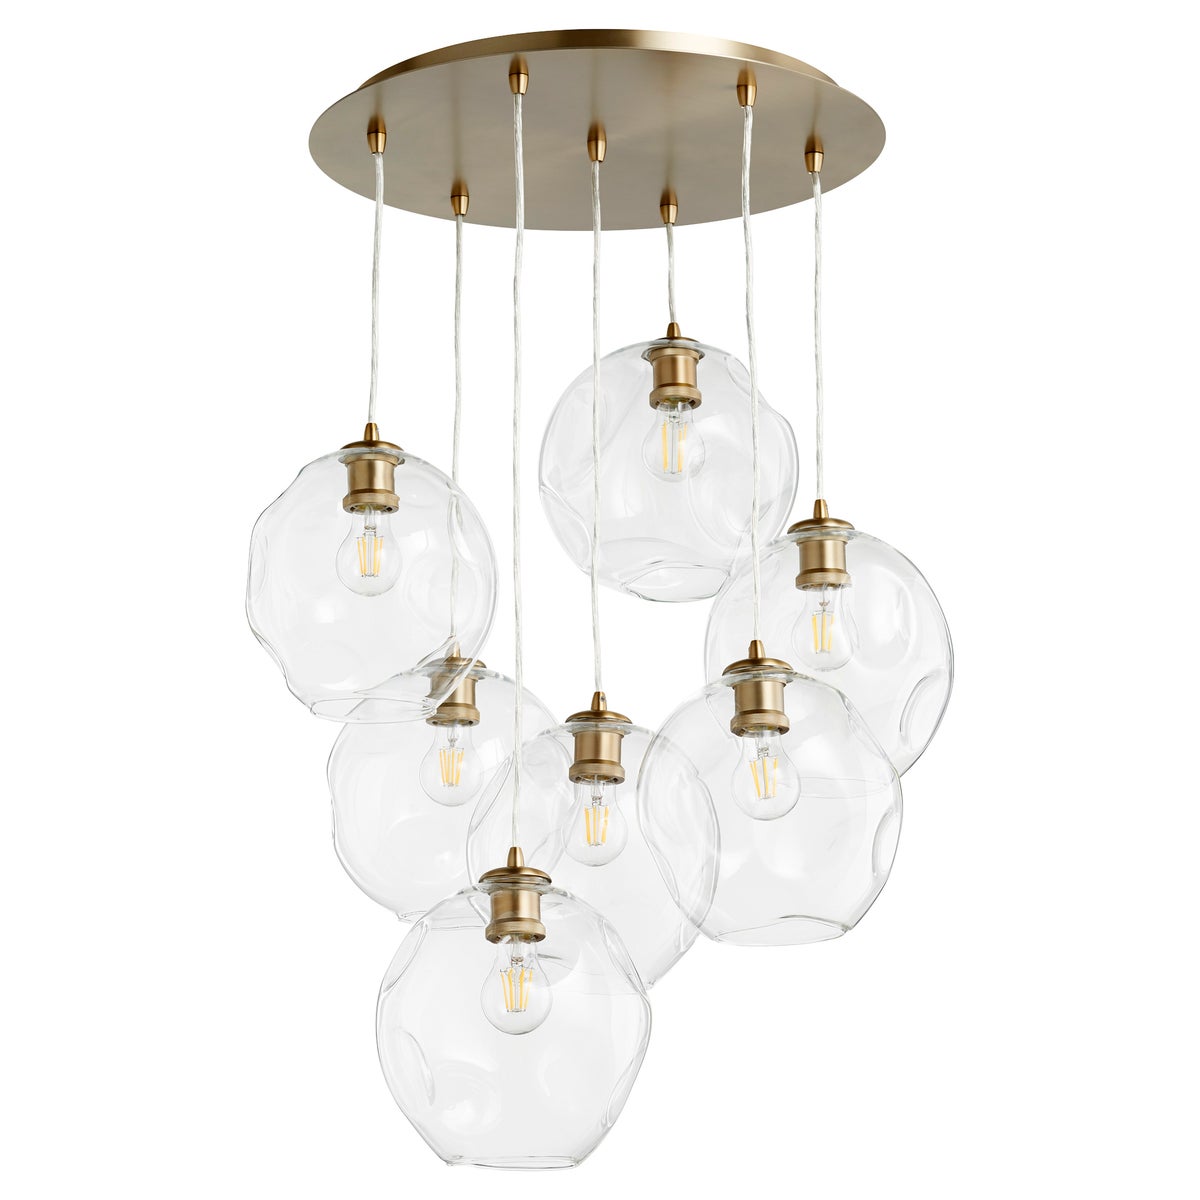 Cluster Pendant Light with clear glass balls and wavy globe shade, suspended by an adjustable cord. Contemporary style ceiling fixture by Quorum International.